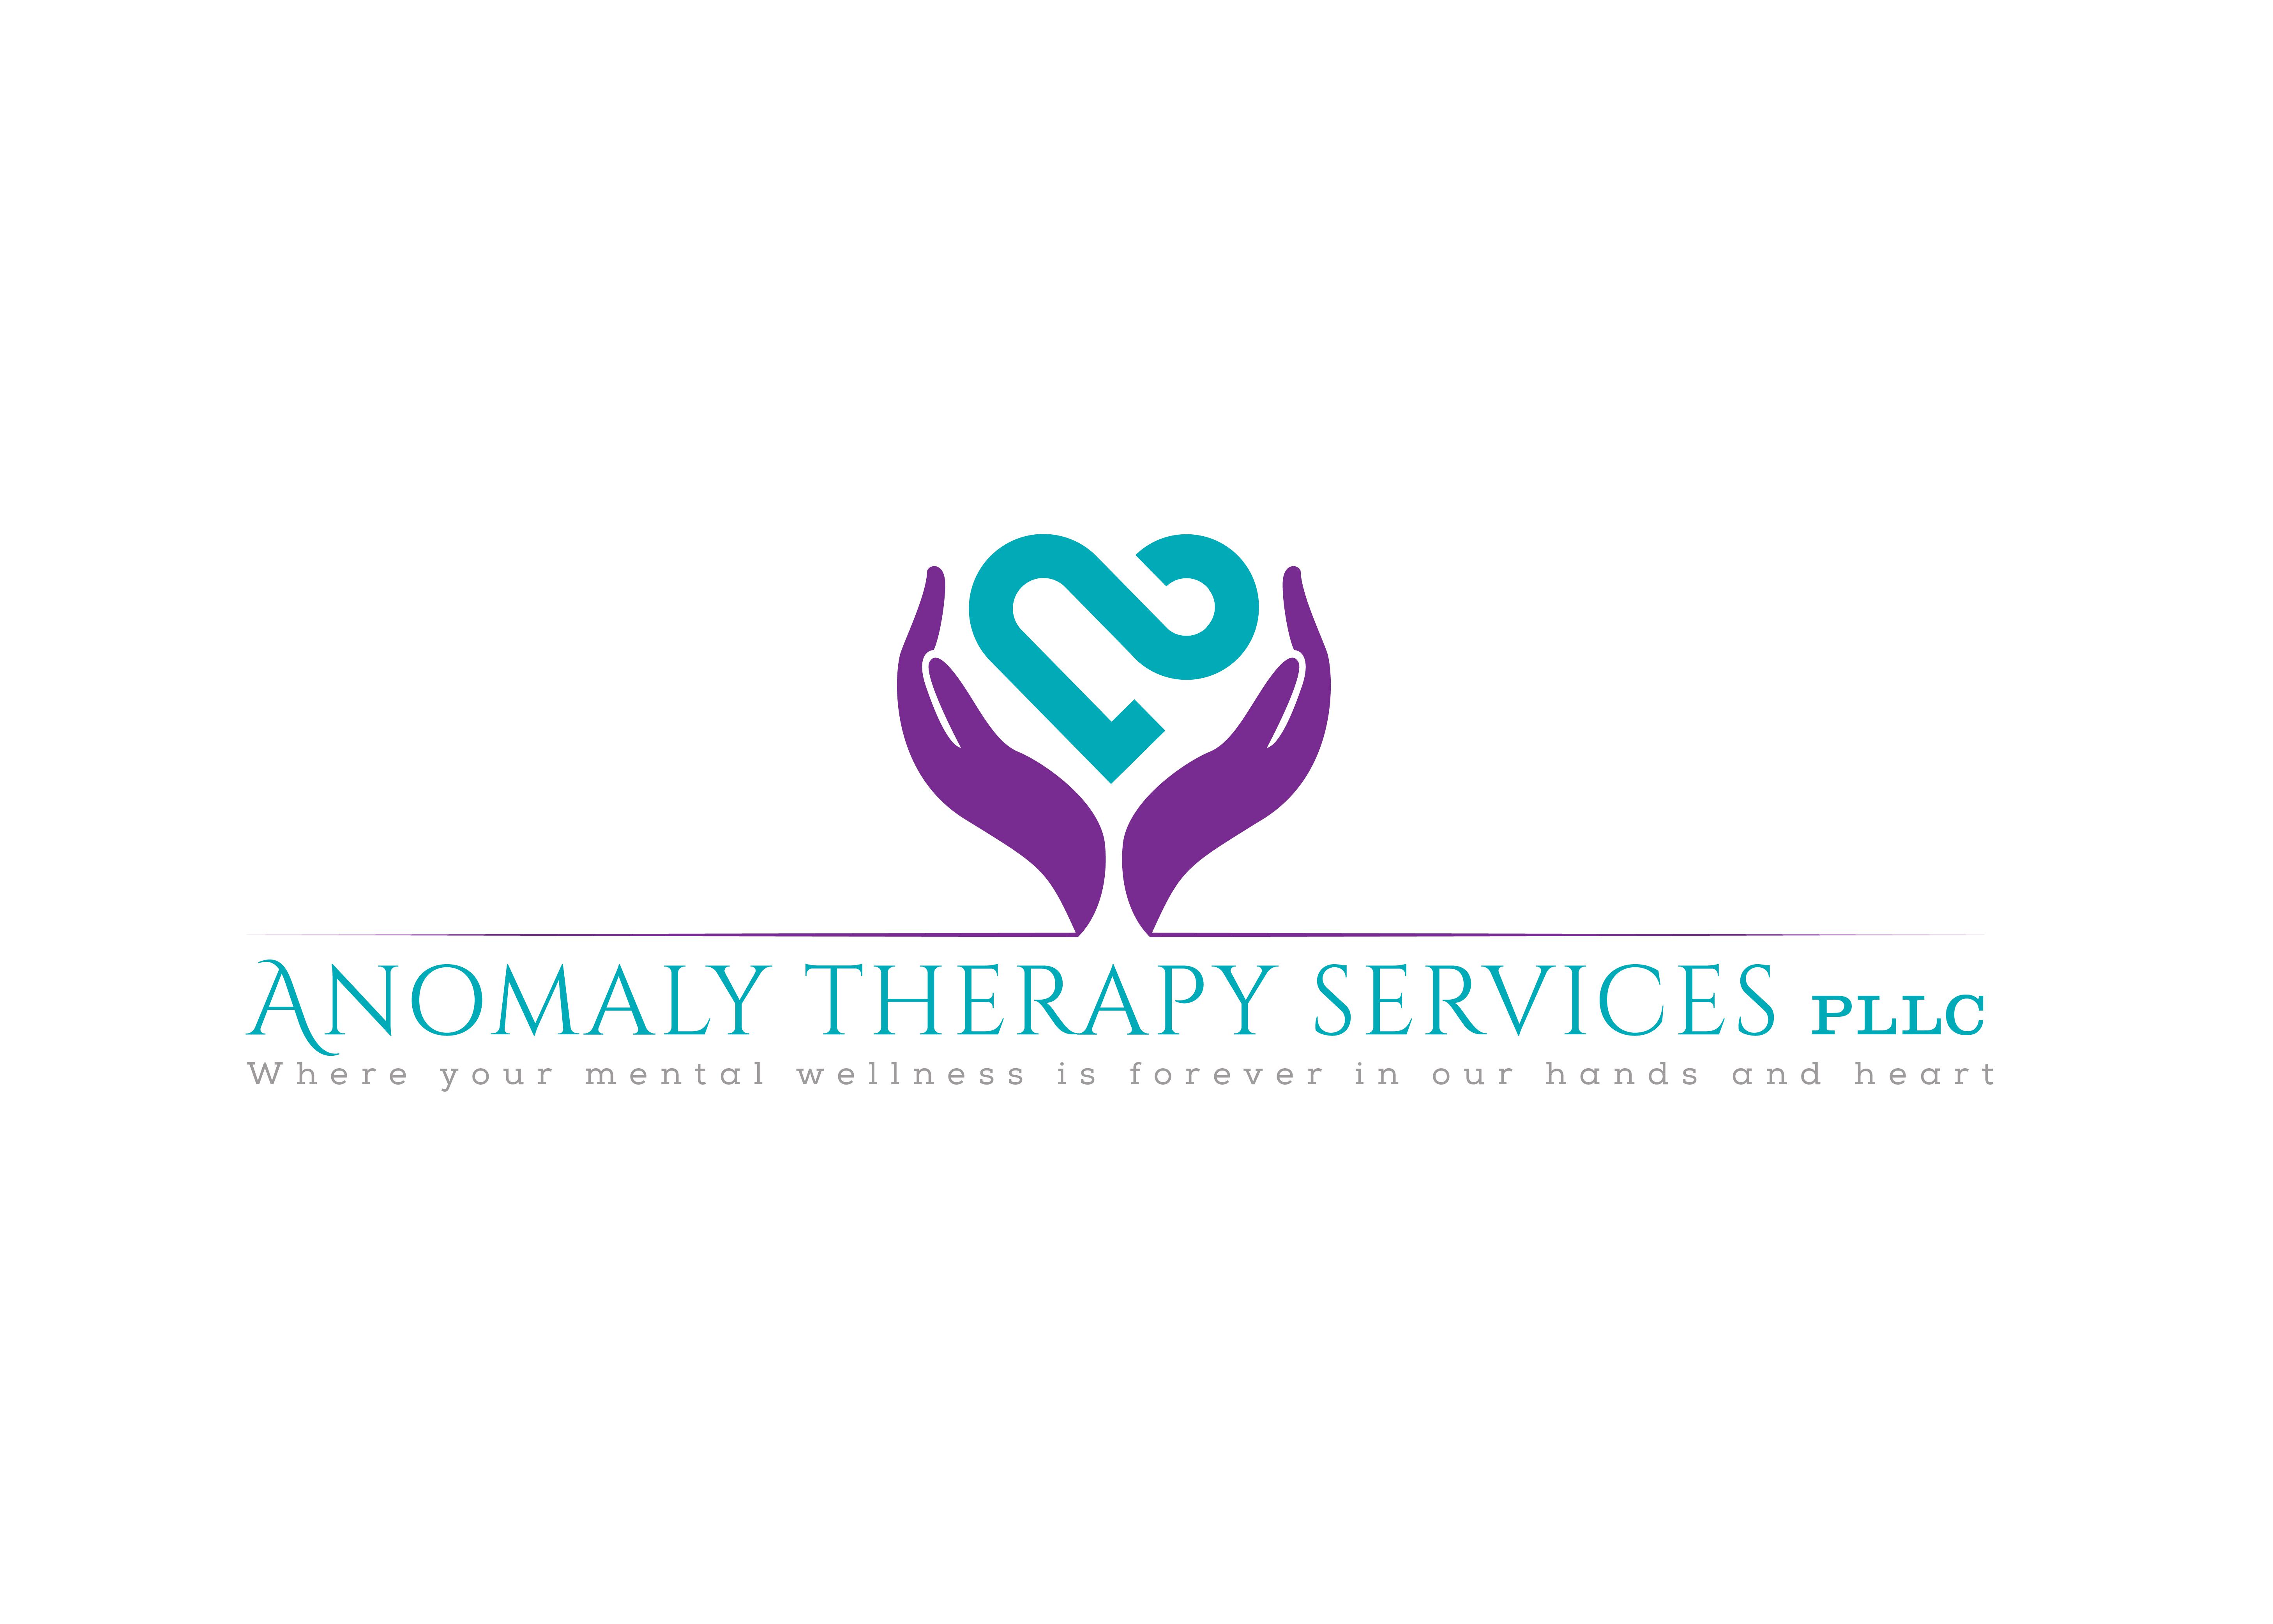 Anomaly Therapy Services PLLC Logo